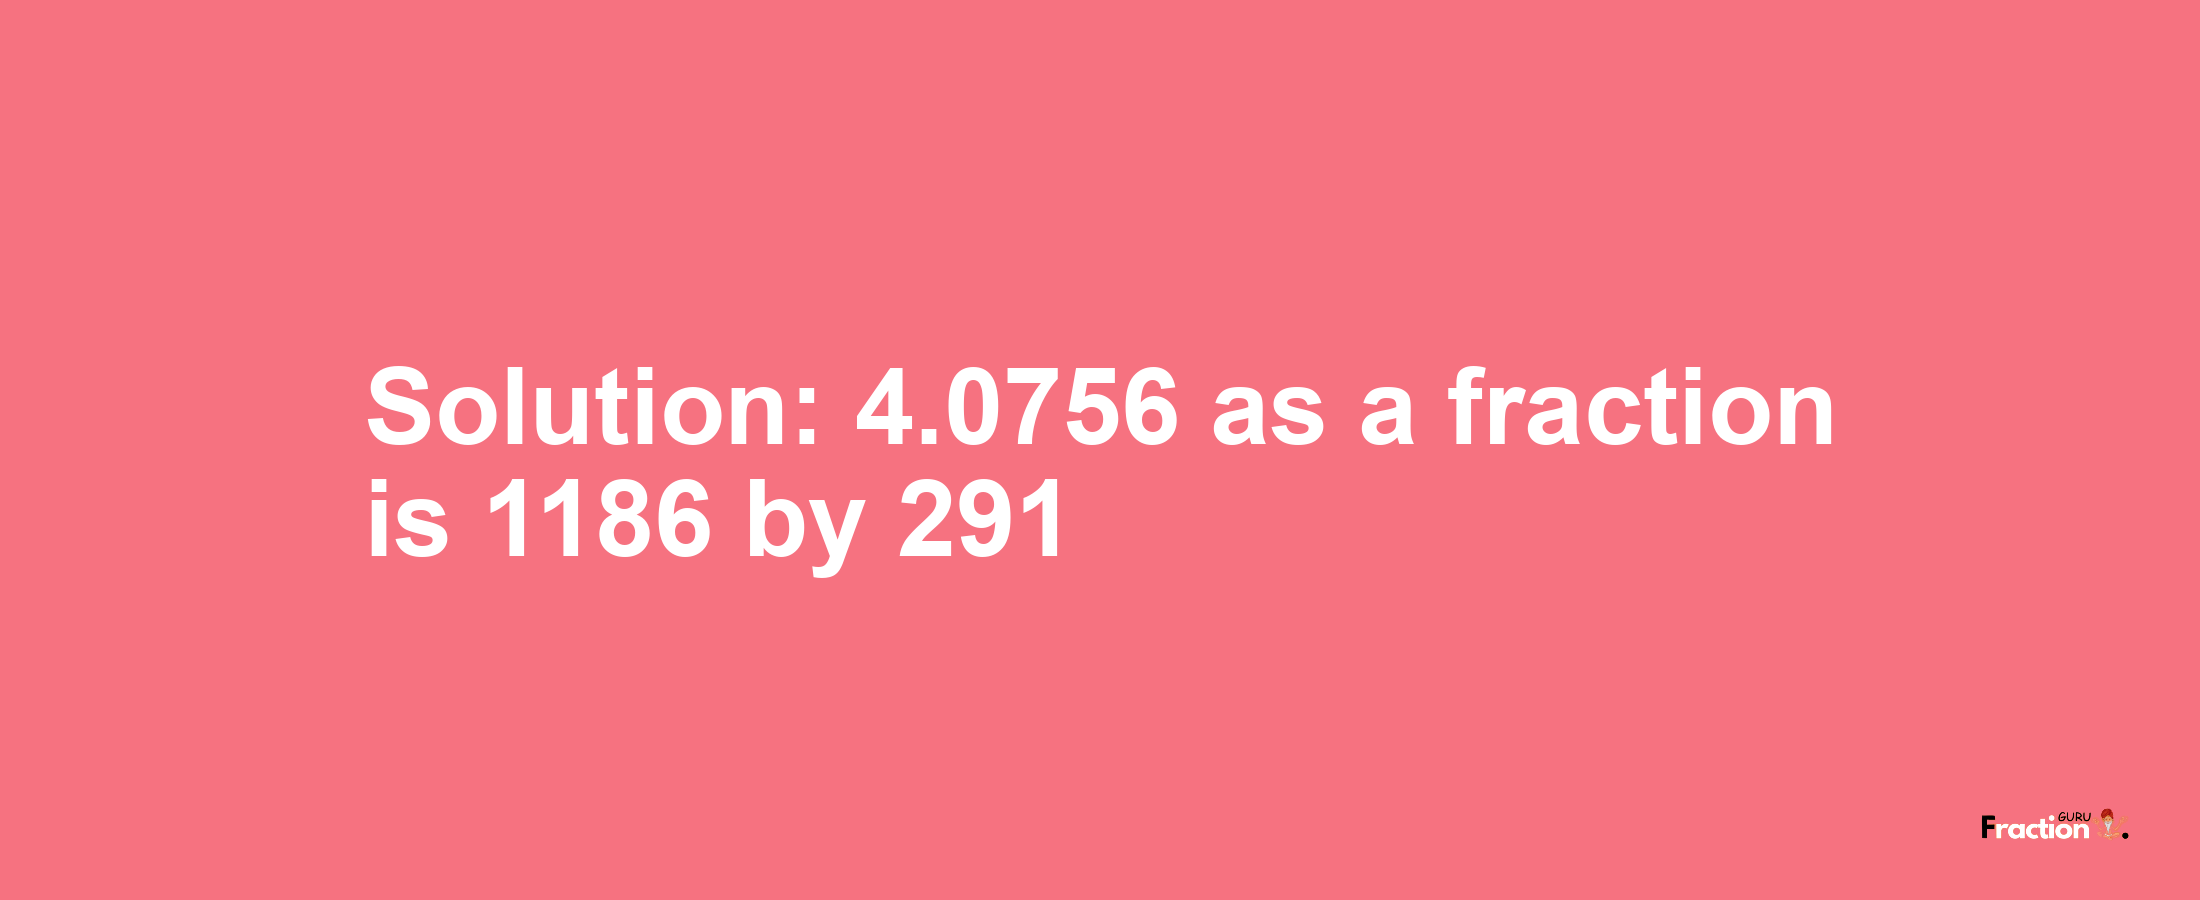 Solution:4.0756 as a fraction is 1186/291